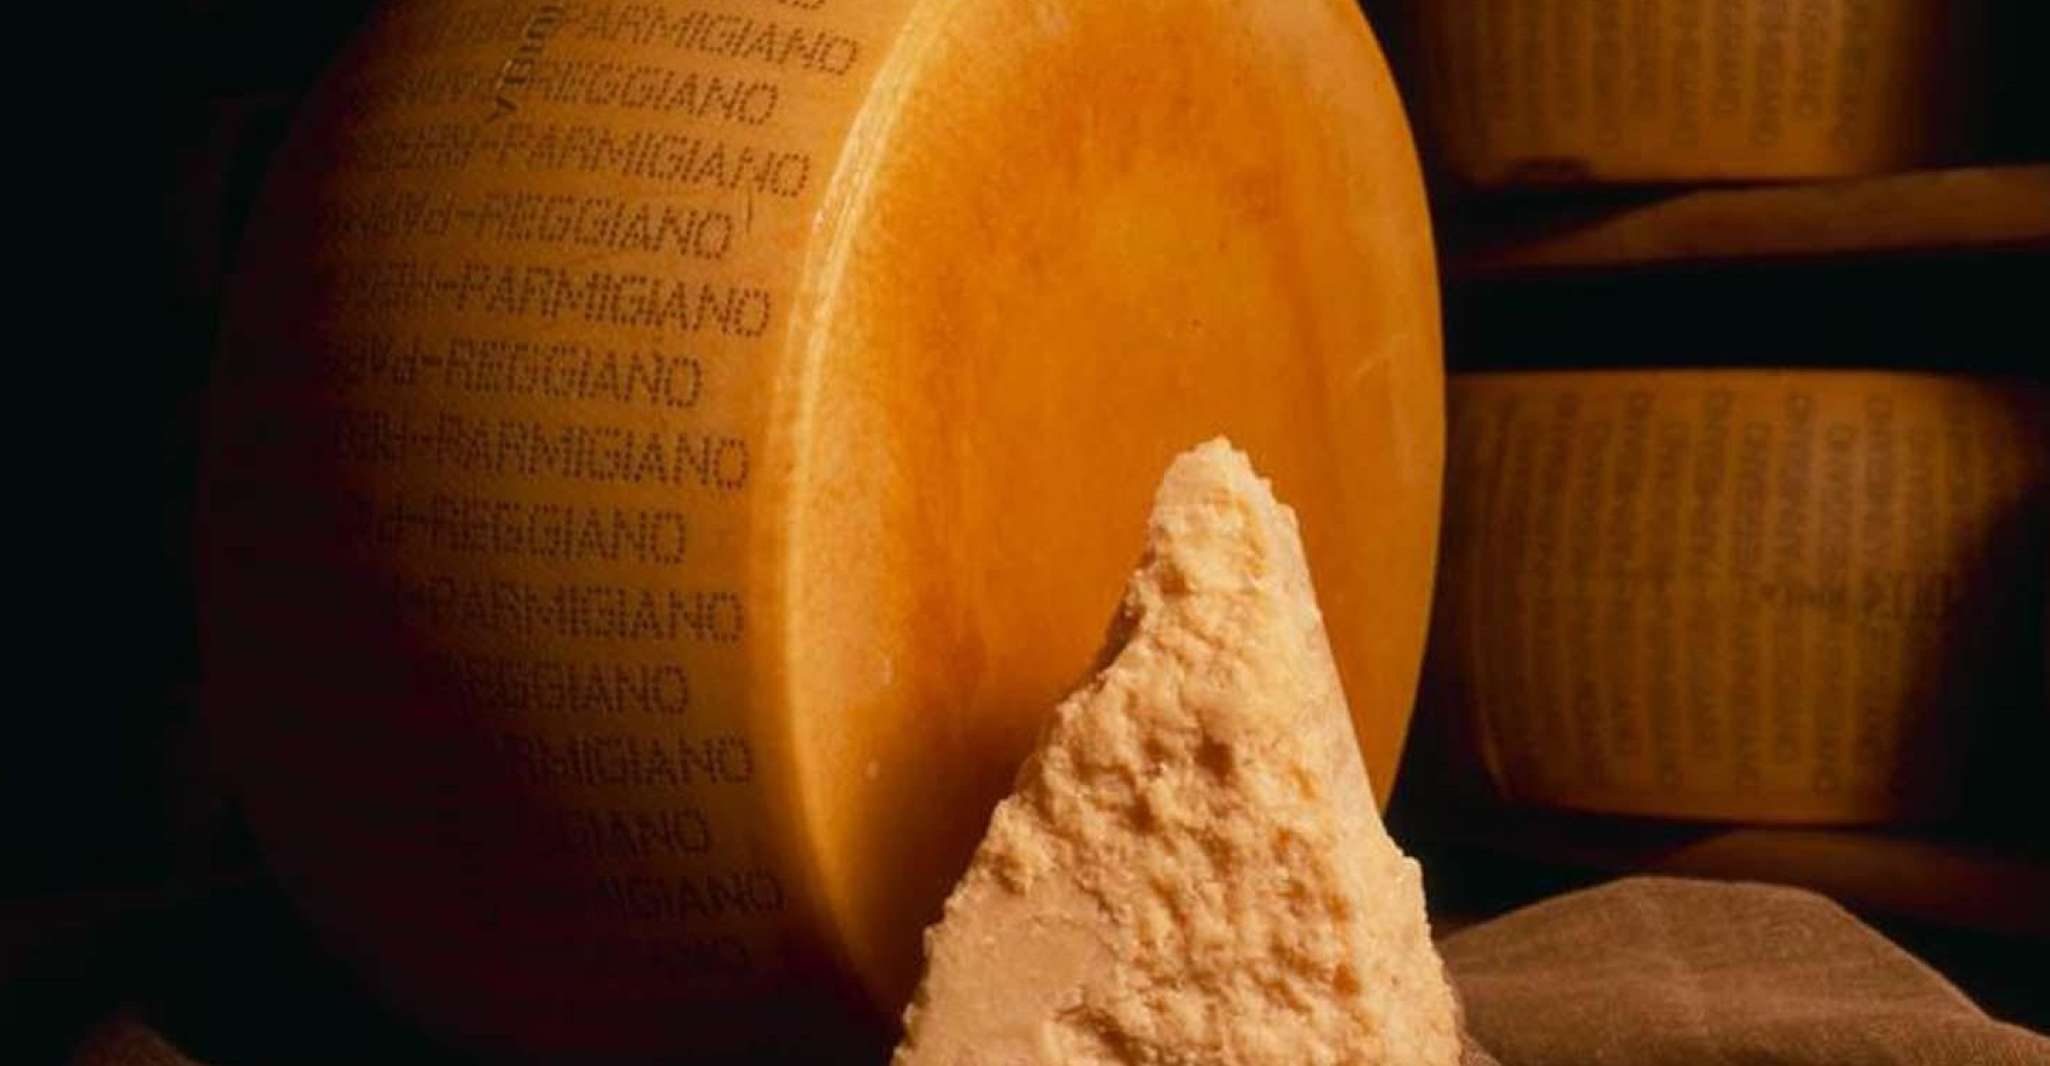 Parma, Traditional Cheese Factory Visit with Tasting - Housity